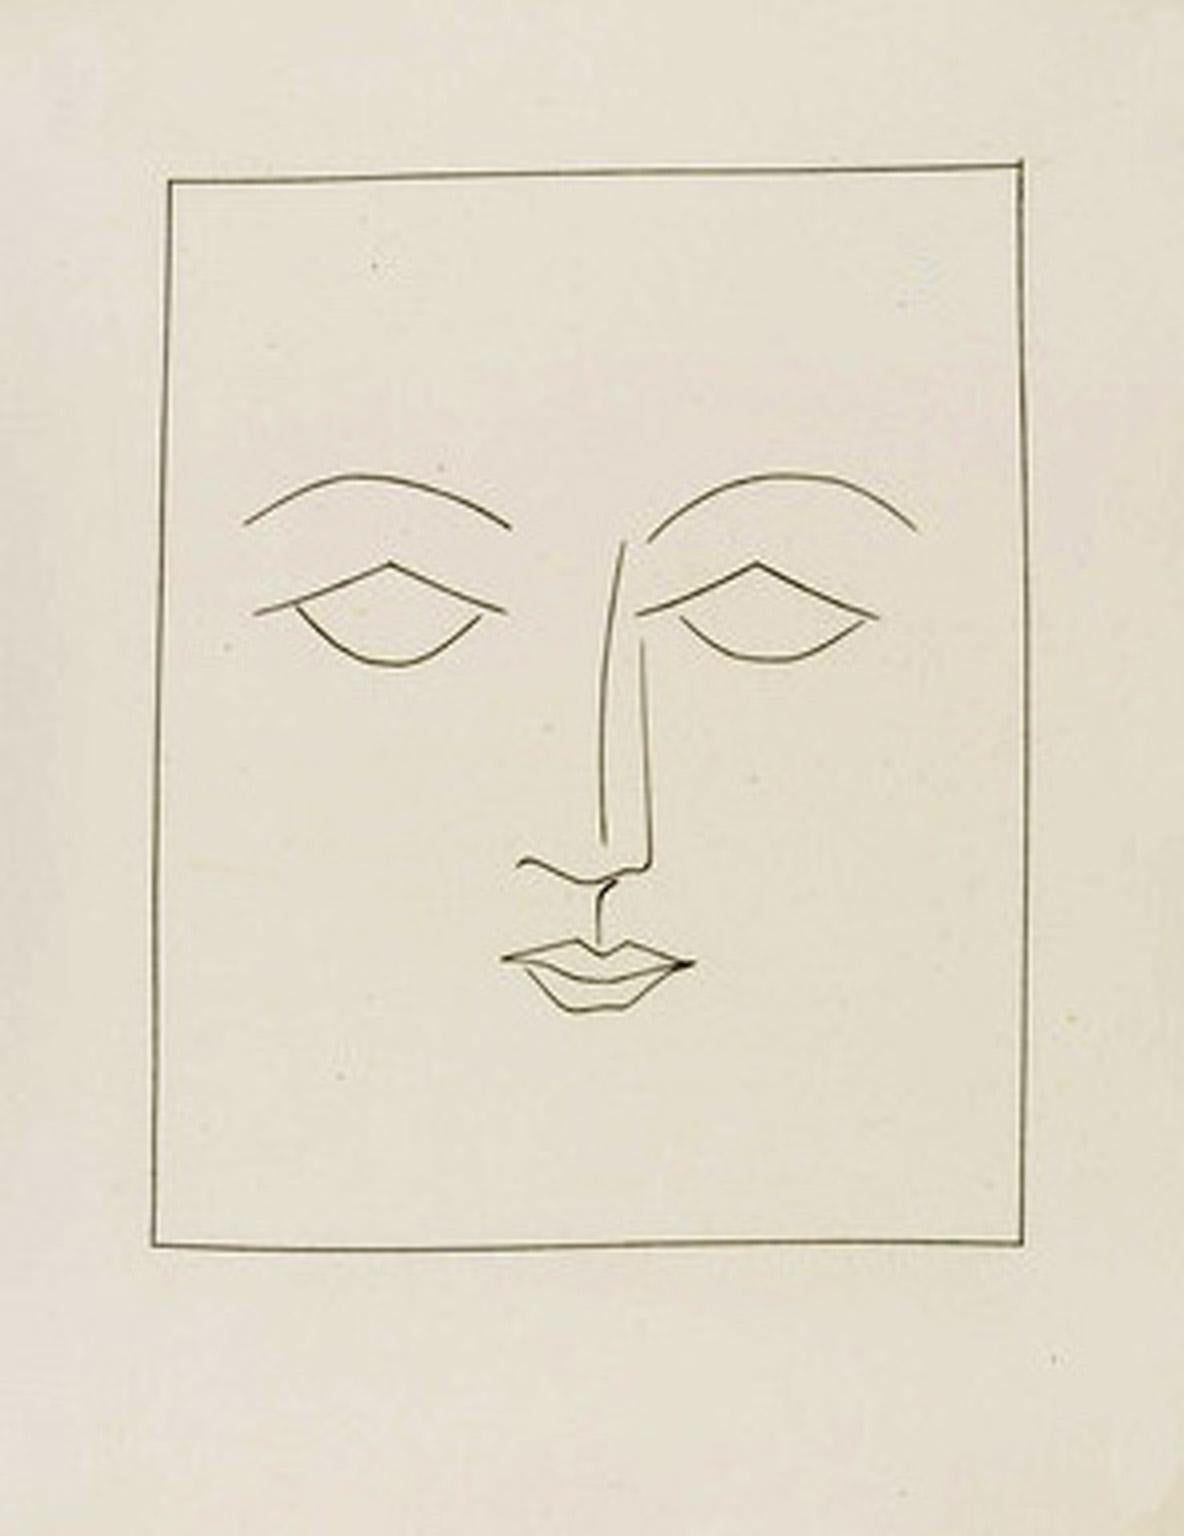 Pablo Picasso Portrait Print - Carmen Square Head of a Man with Soft Features (Plate IV)